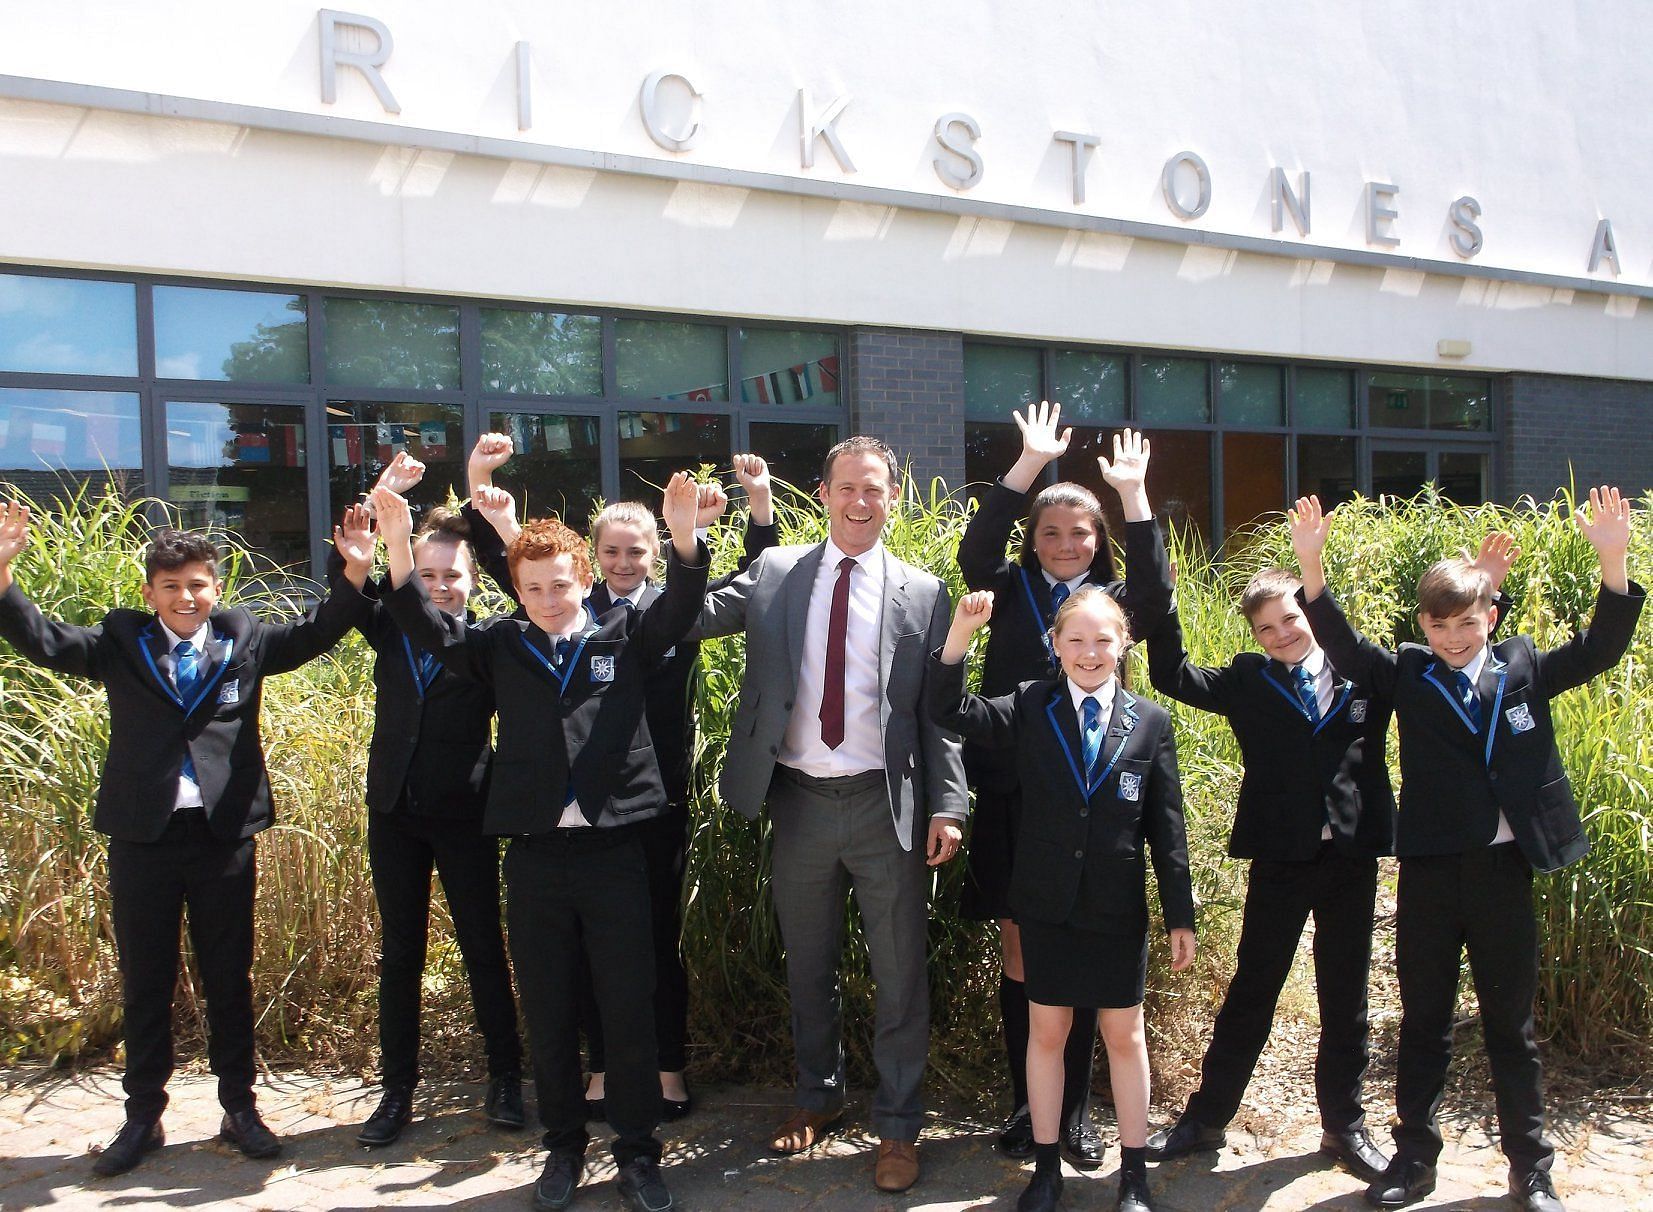 New Rickstones Academy was graded as &quot;Good School&quot; by Ofsted in 2018, the year Mr Simon Gibbs joined (Image via Facebook/NewRickstonesAcademy)